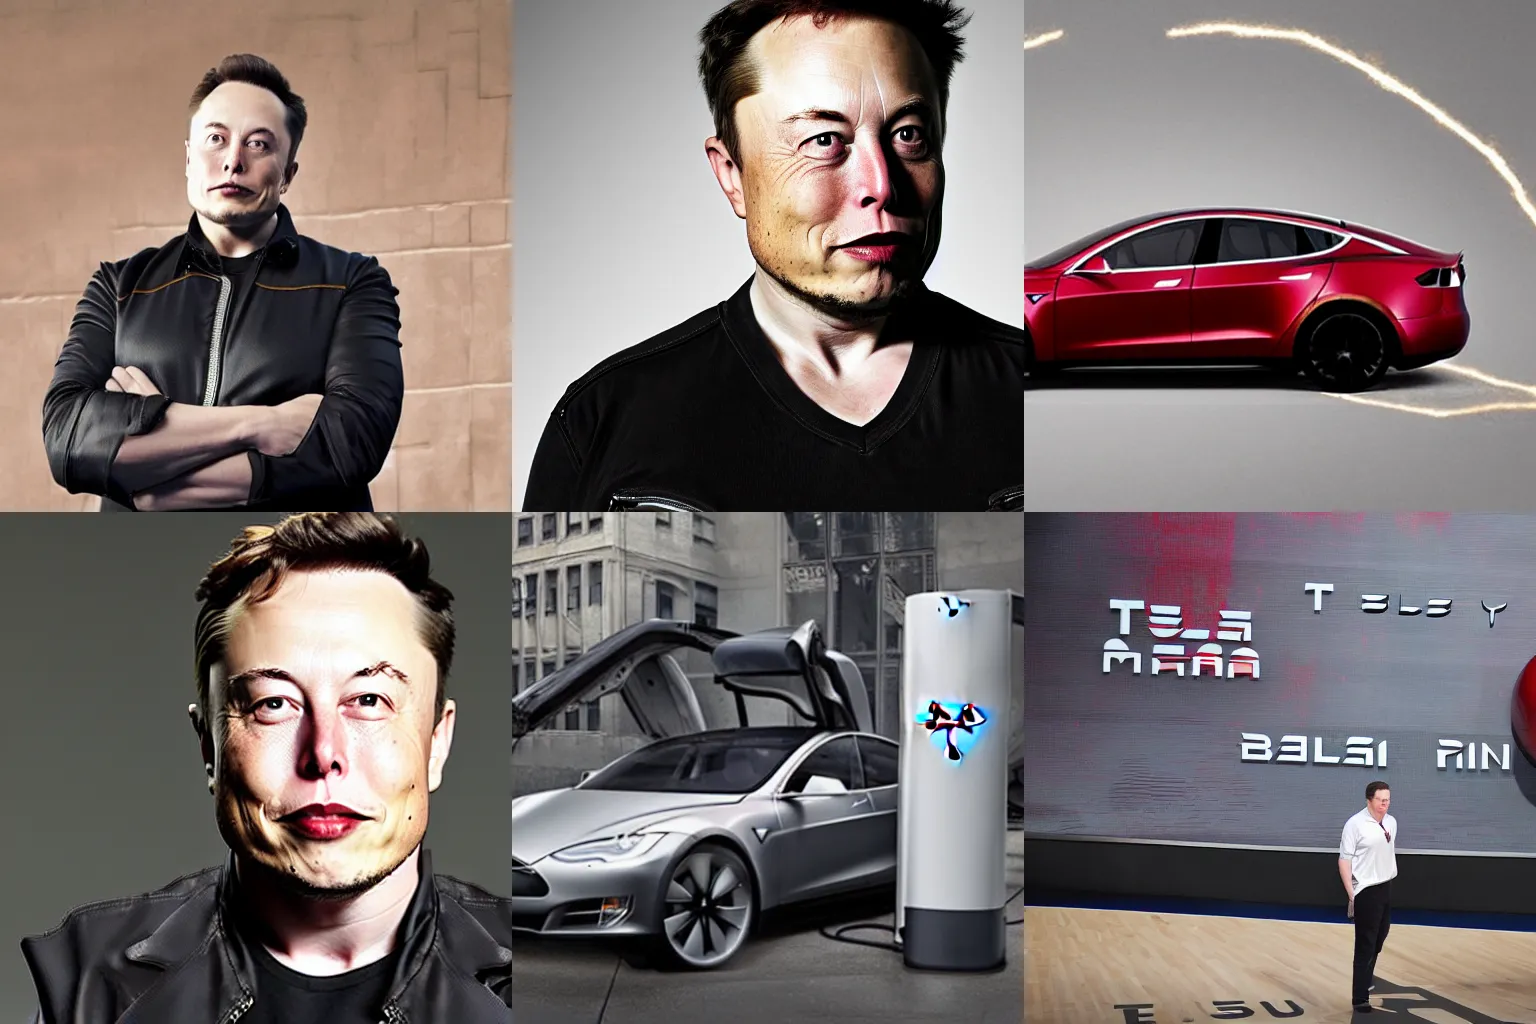 Prompt: Elon Musk designed by Tesla and Boston Dybamics